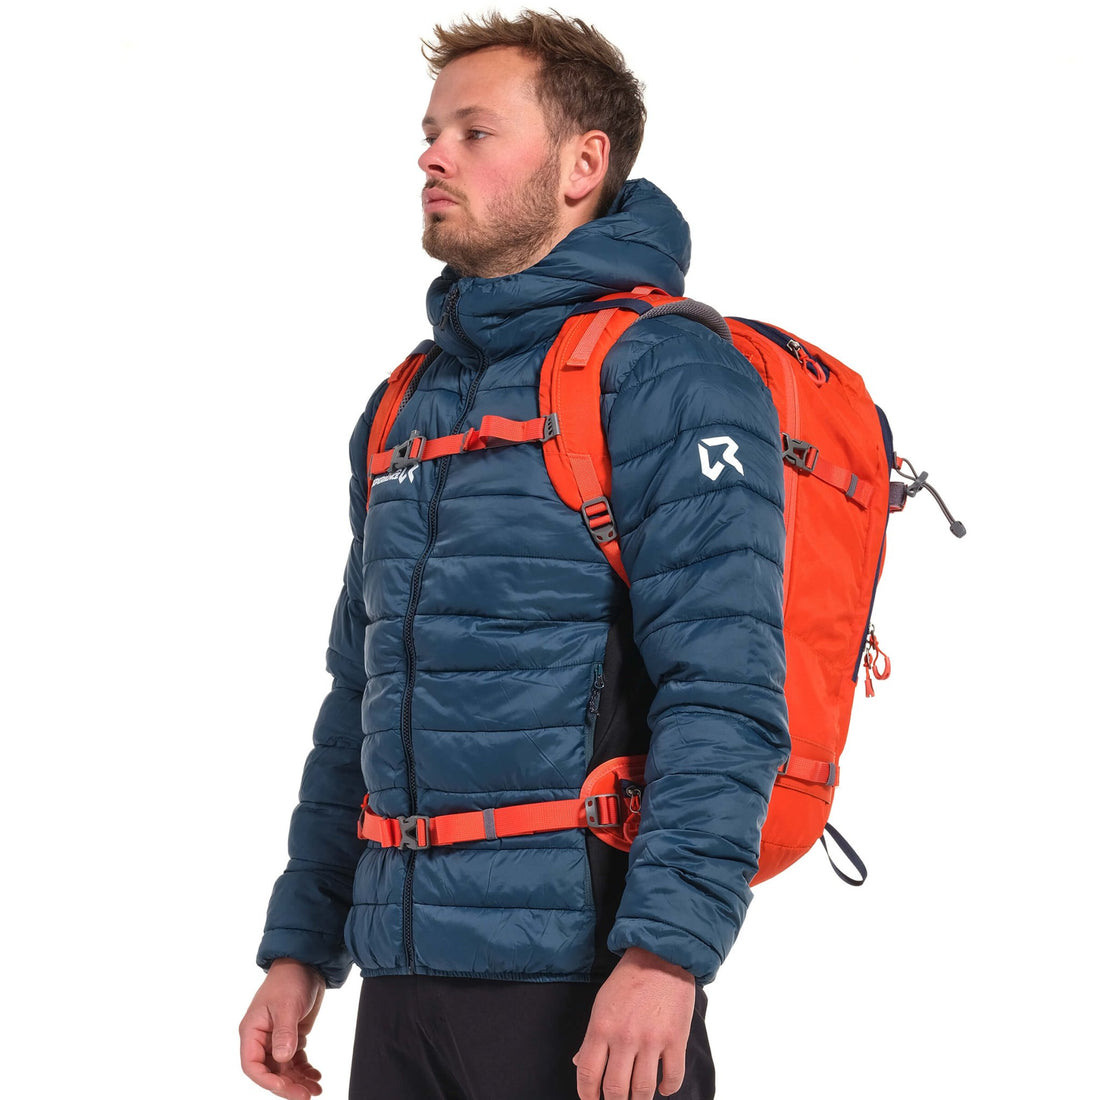 Rock Experience - ALCHEMIST 32 - Backpack - World of Alps